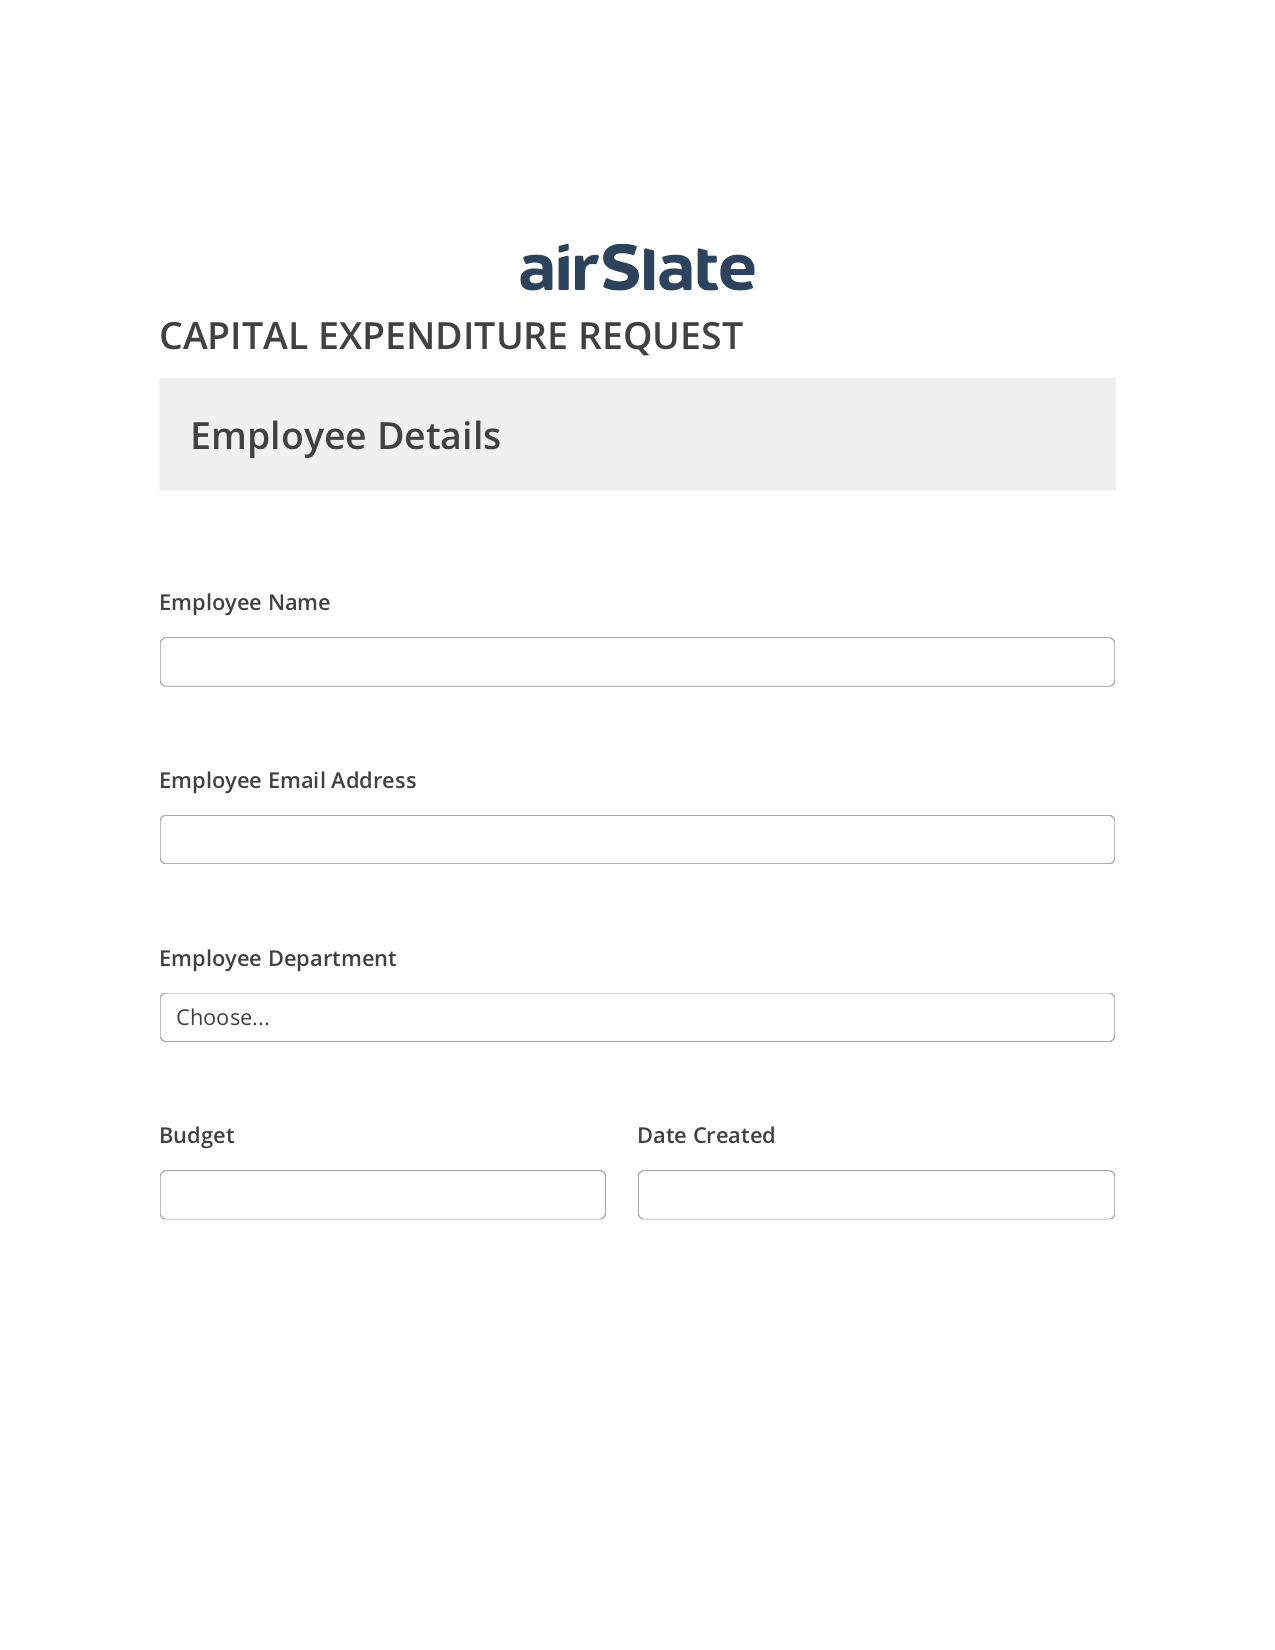 Multirole Capital Expenditure Request Approval Workflow Pre-fill from Google Sheets Bot, Create slate from another Flow Bot, Archive to OneDrive Bot